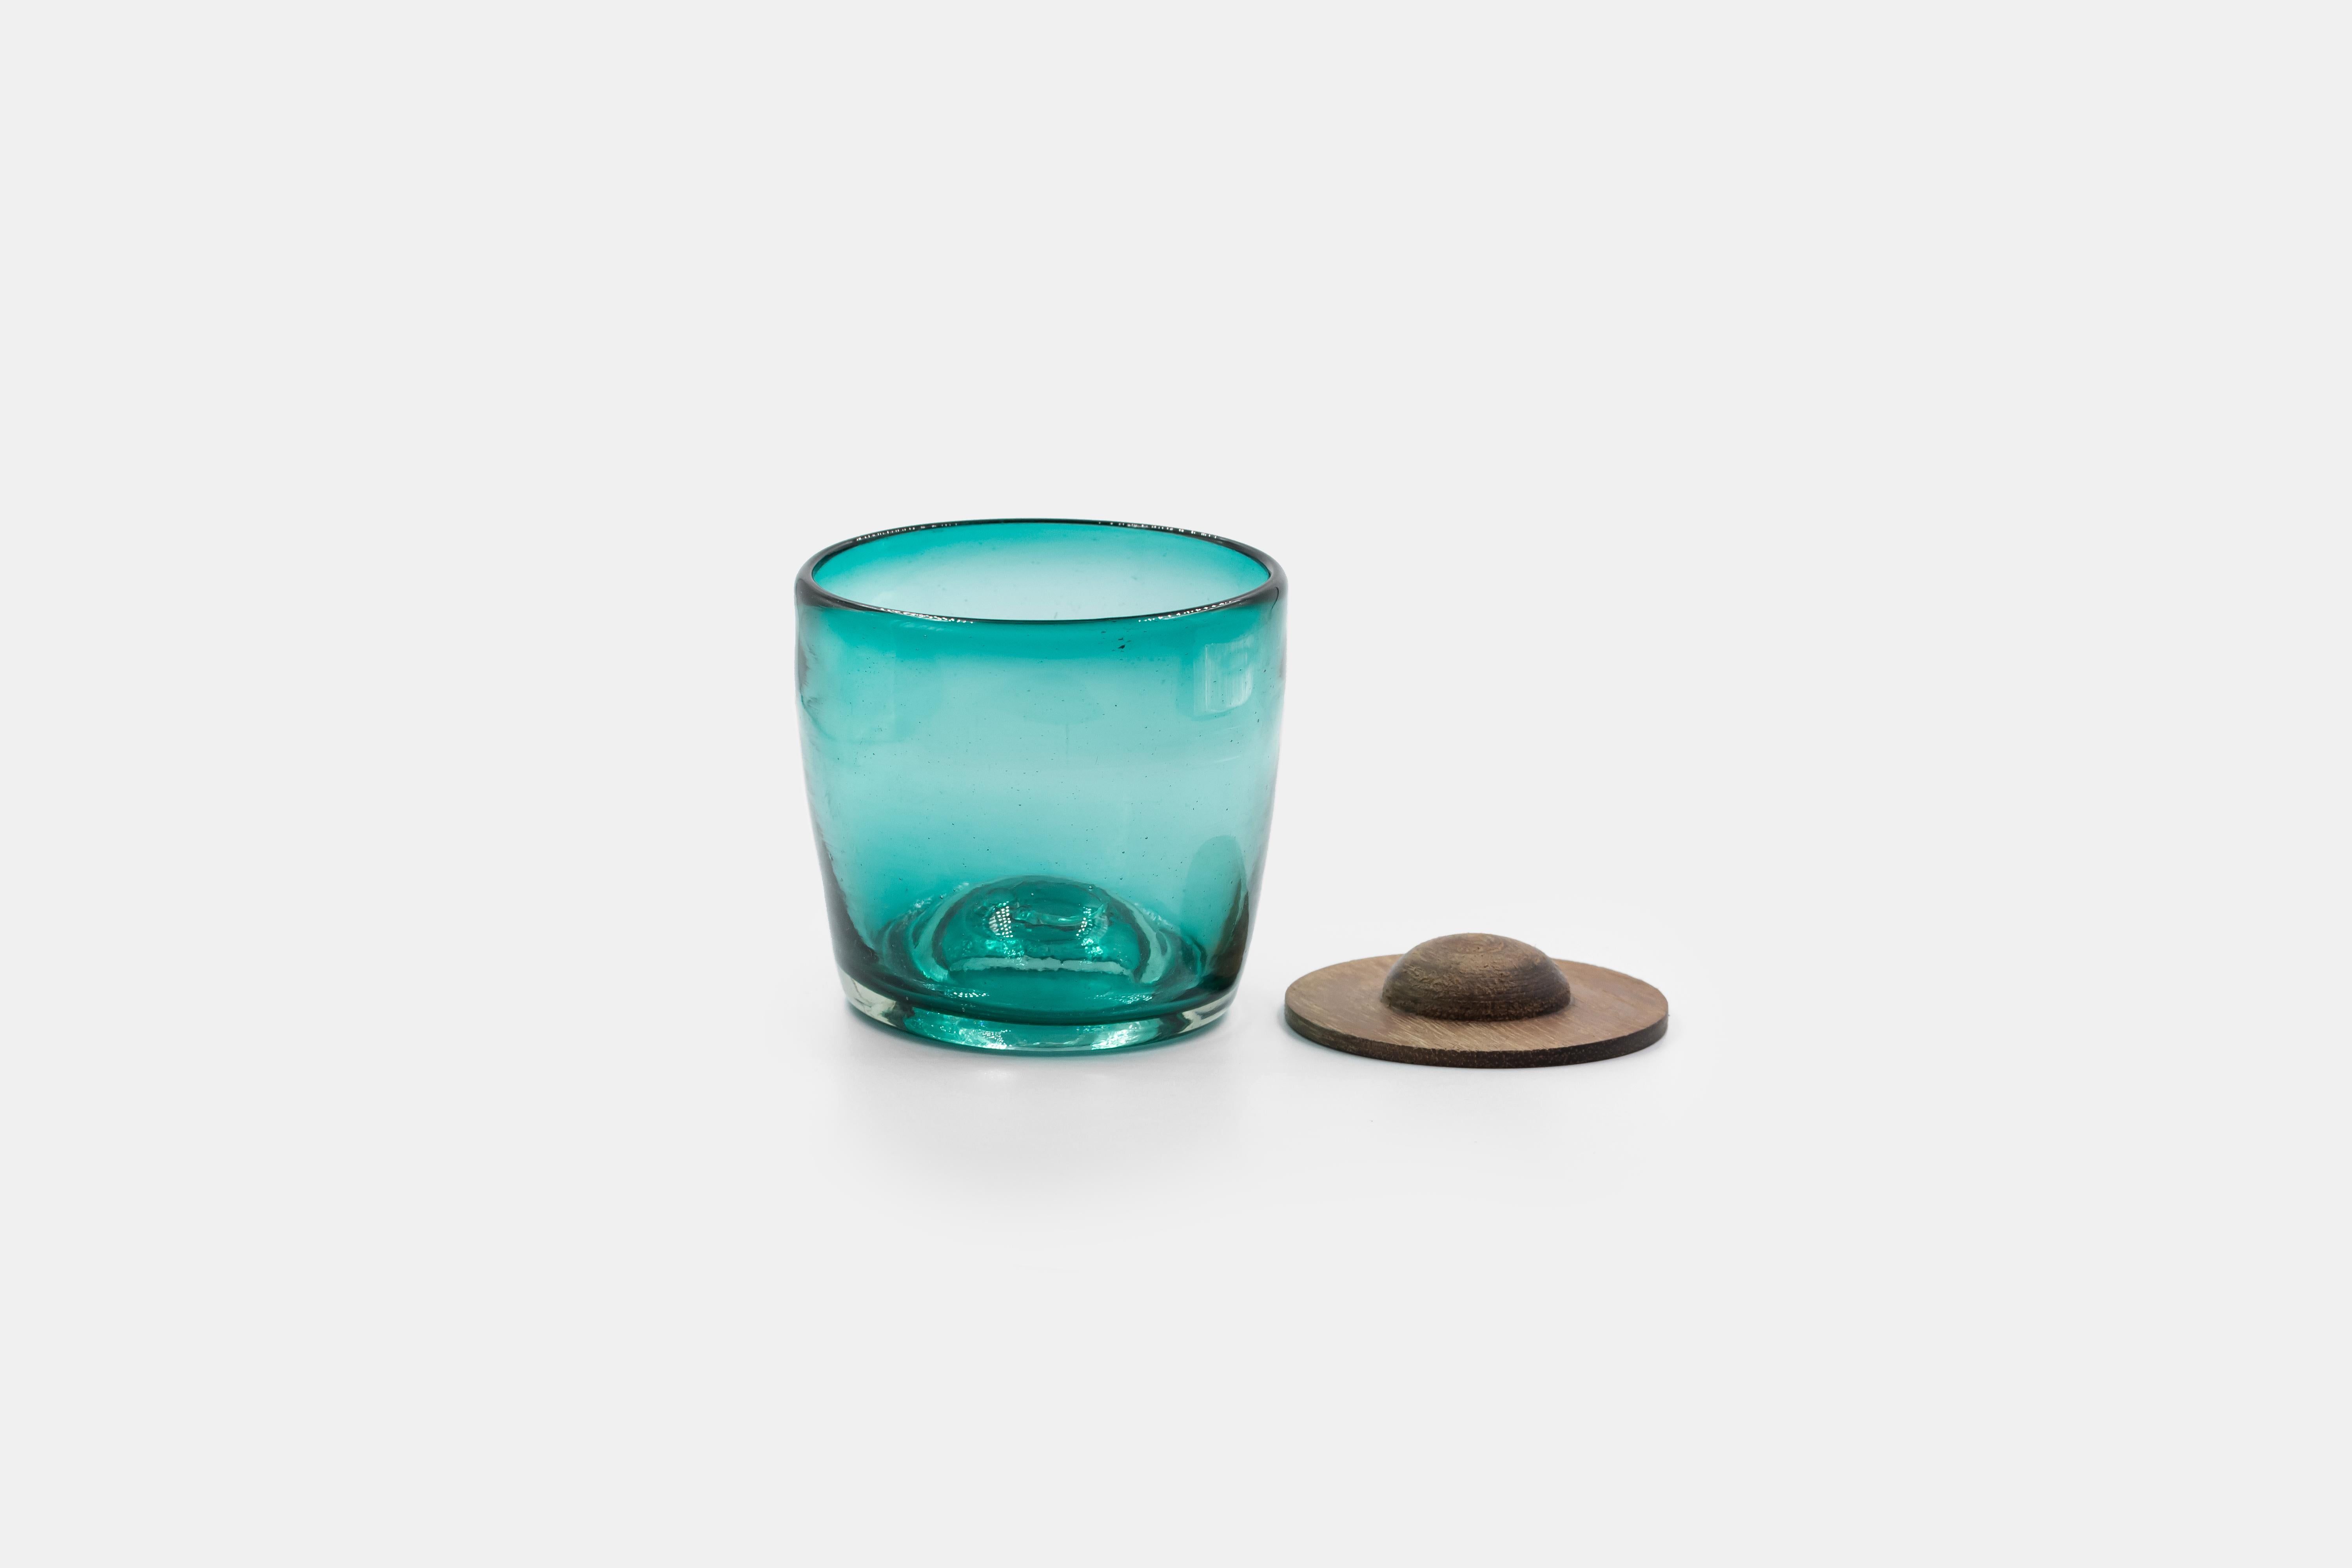 The liquid character of the molten glass bubble is the inspiration for the “Basico” glaseses. Its shape is molded and adapted to the half sphere of the practical wooden base on which the glass rests creating an aesthetic detail, characteristic